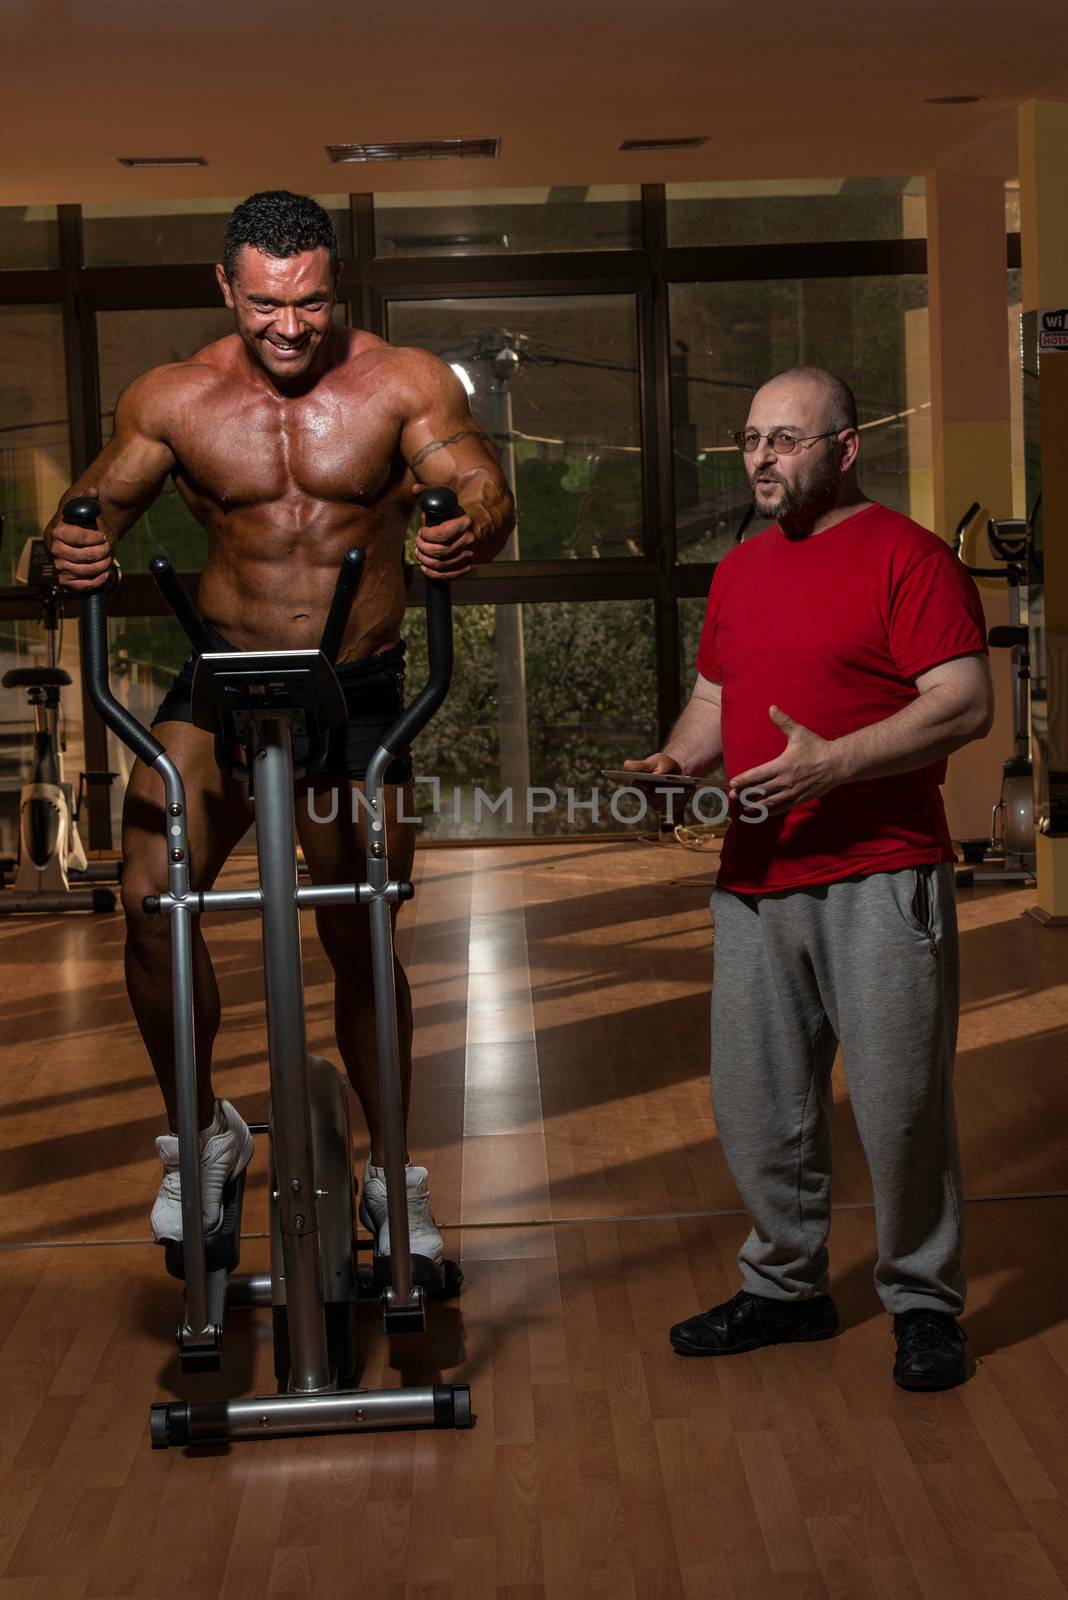 training in gym where partner gives encouragement by JalePhoto